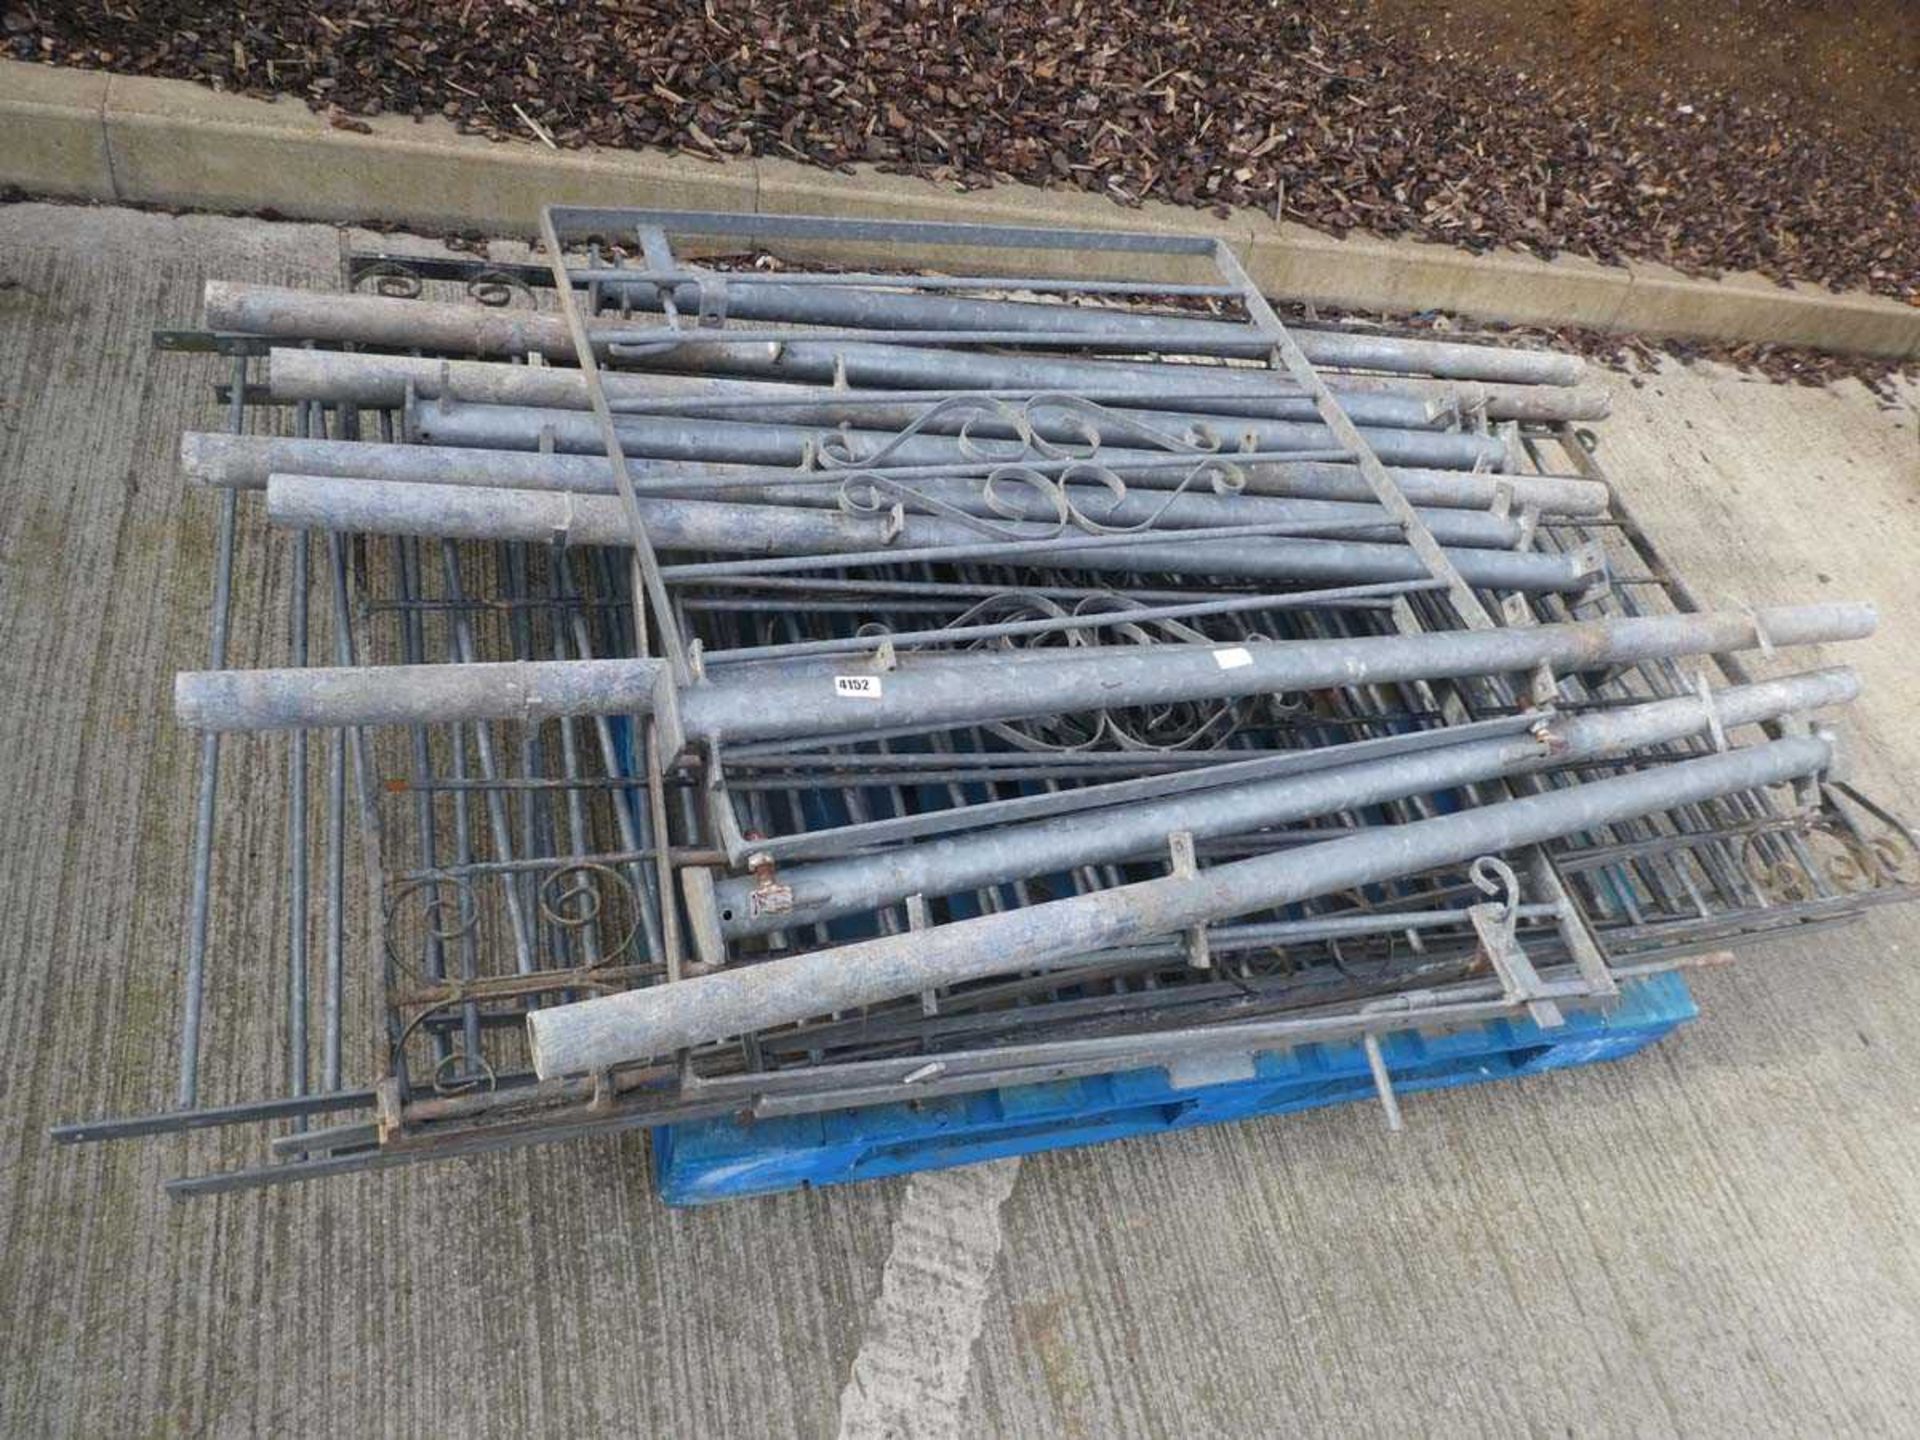 Pallet containing galvanized gates and posts